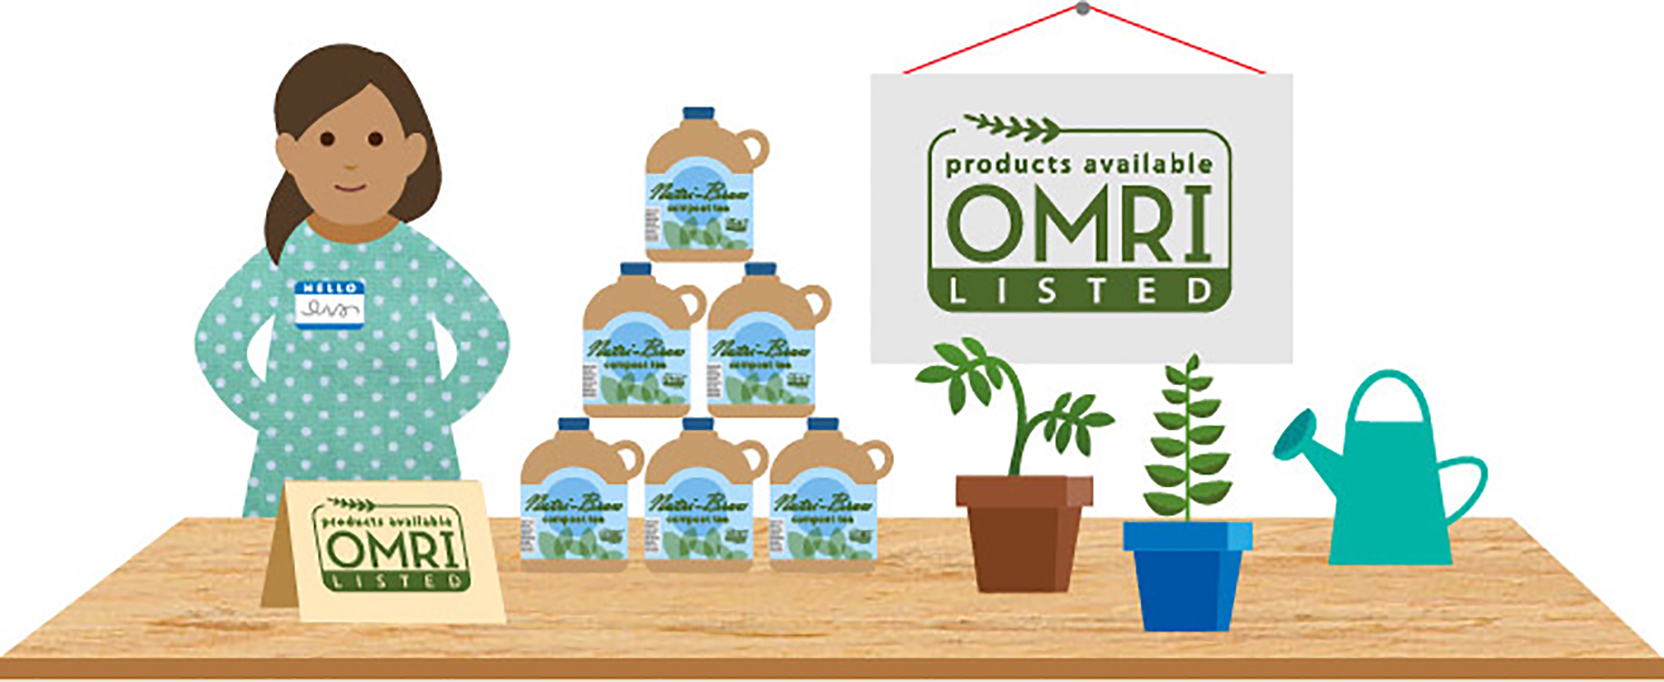 Graphic of a vendor standing at a table with product and a sign saying "OMRI Listed products available"